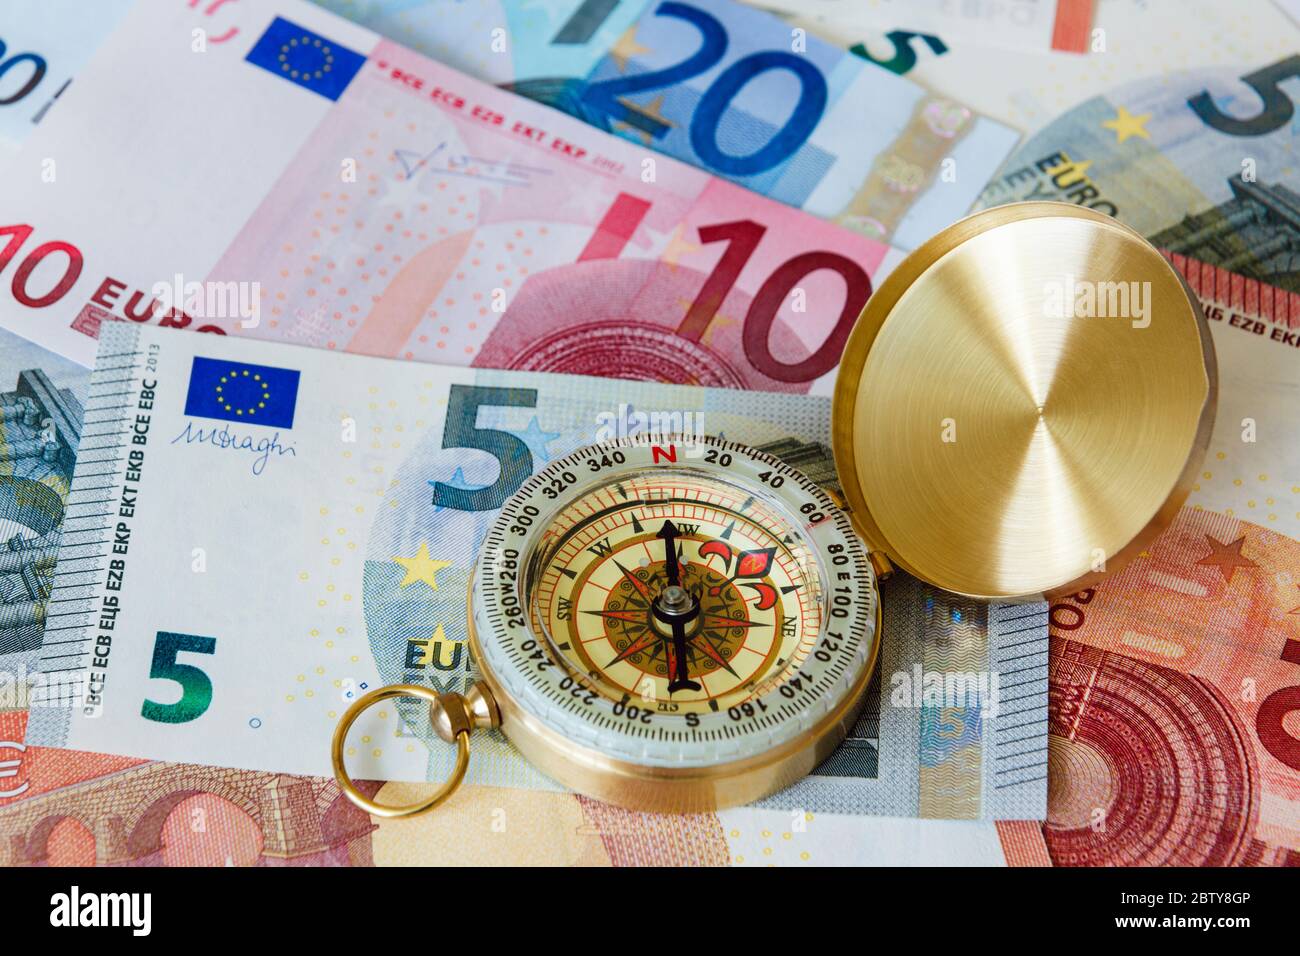 EU money with a brass compass on Euro notes Euros to illustrate future of the Eurozone economy.  Change direction concept. Europe Stock Photo